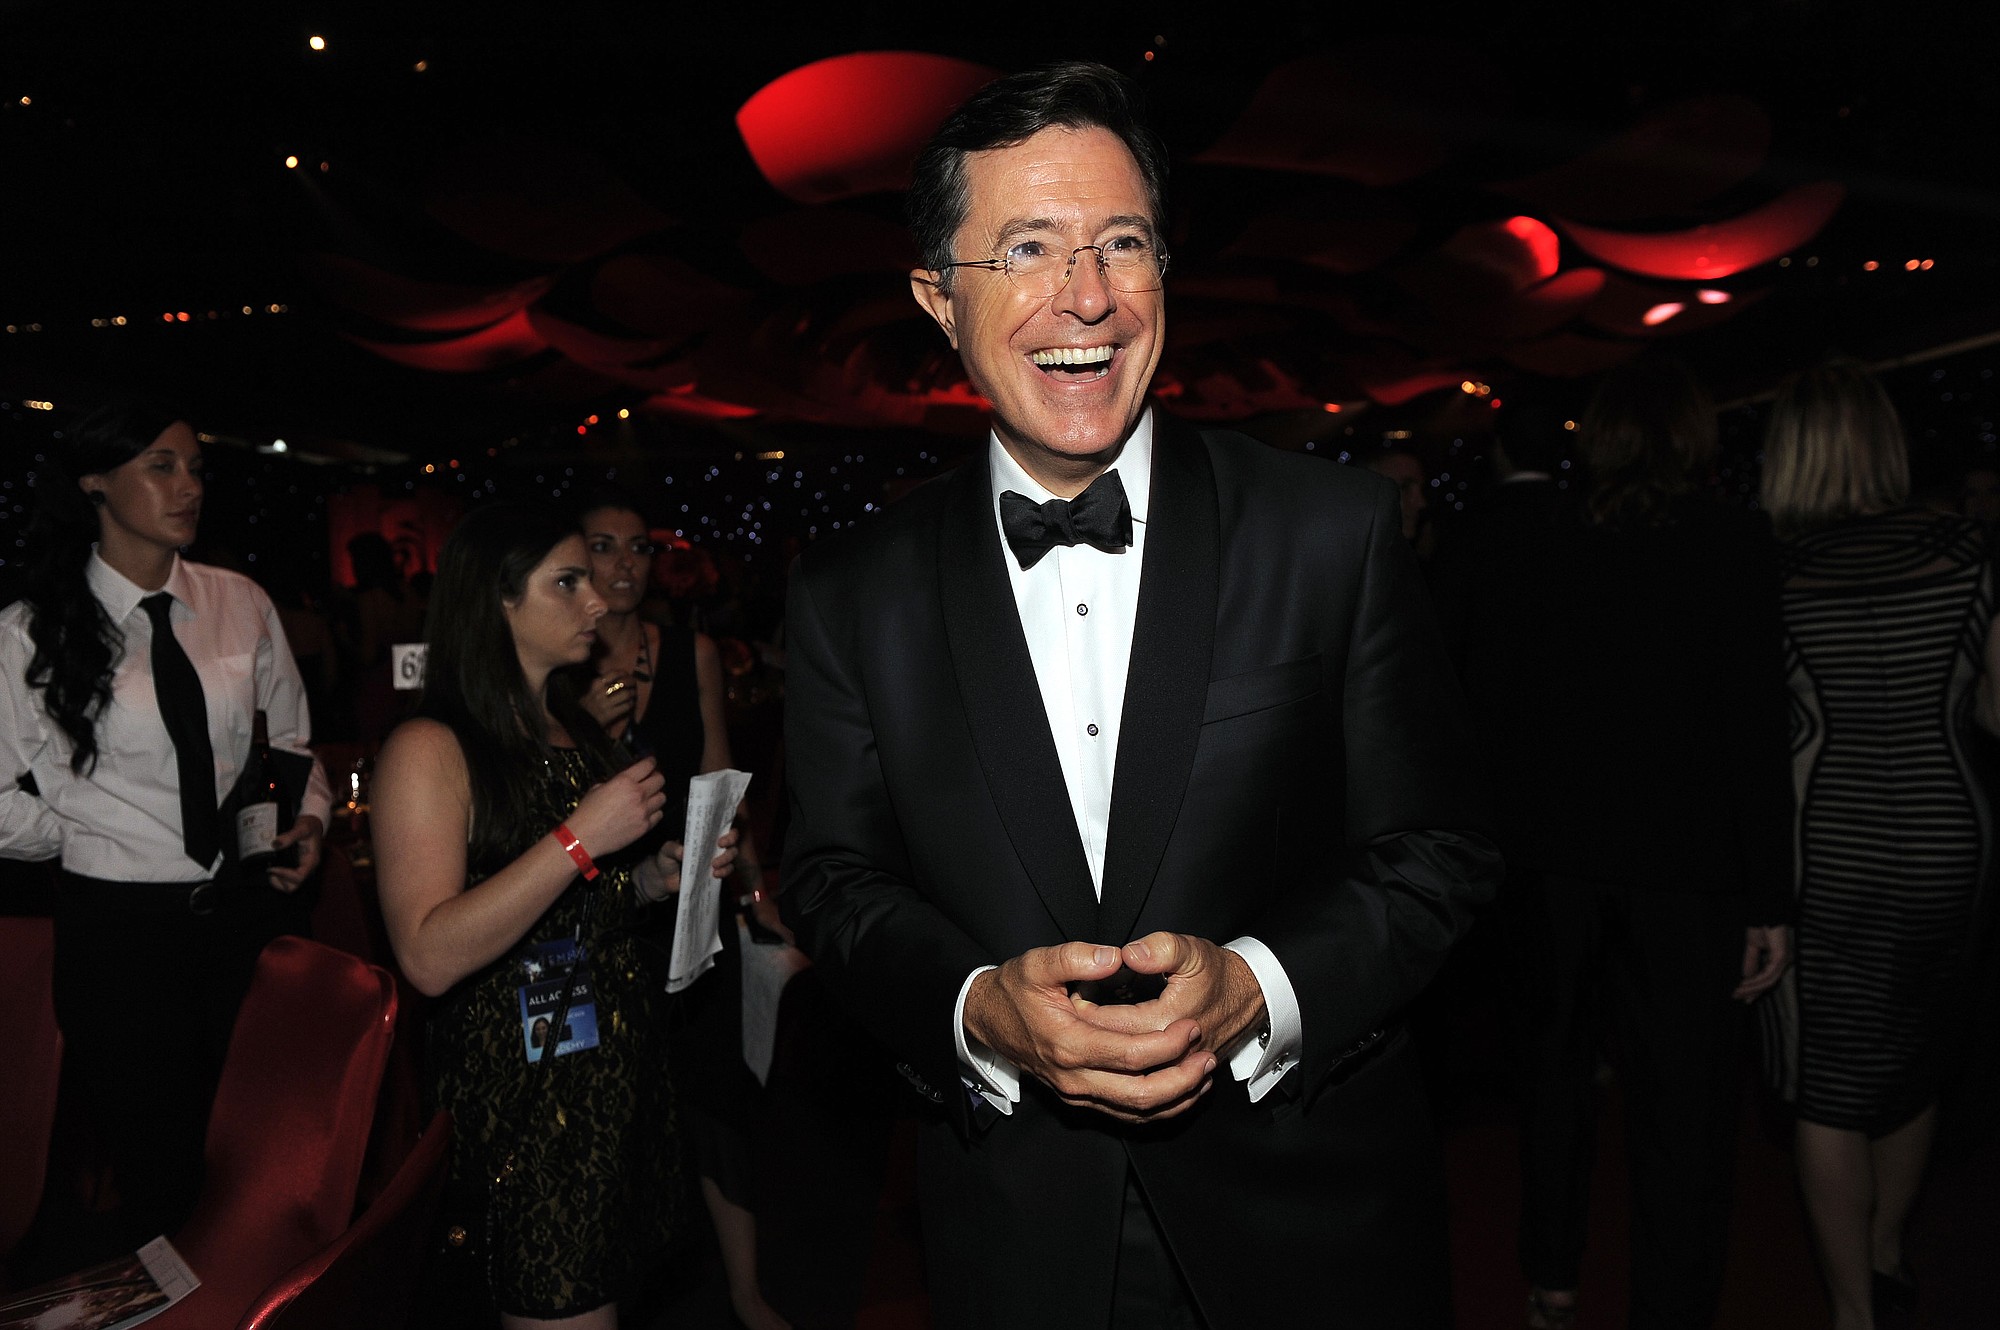 Invision files
Stephen Colbert attends the 64th Primetime Emmy Awards Governors Ball on Sept. 23, 2012 in Los Angeles. CBS says that Stephen Colbert will begin as host of the &quot;Late Show&quot; on Sept. 8. He's replacing David Letterman, who will retire in May.